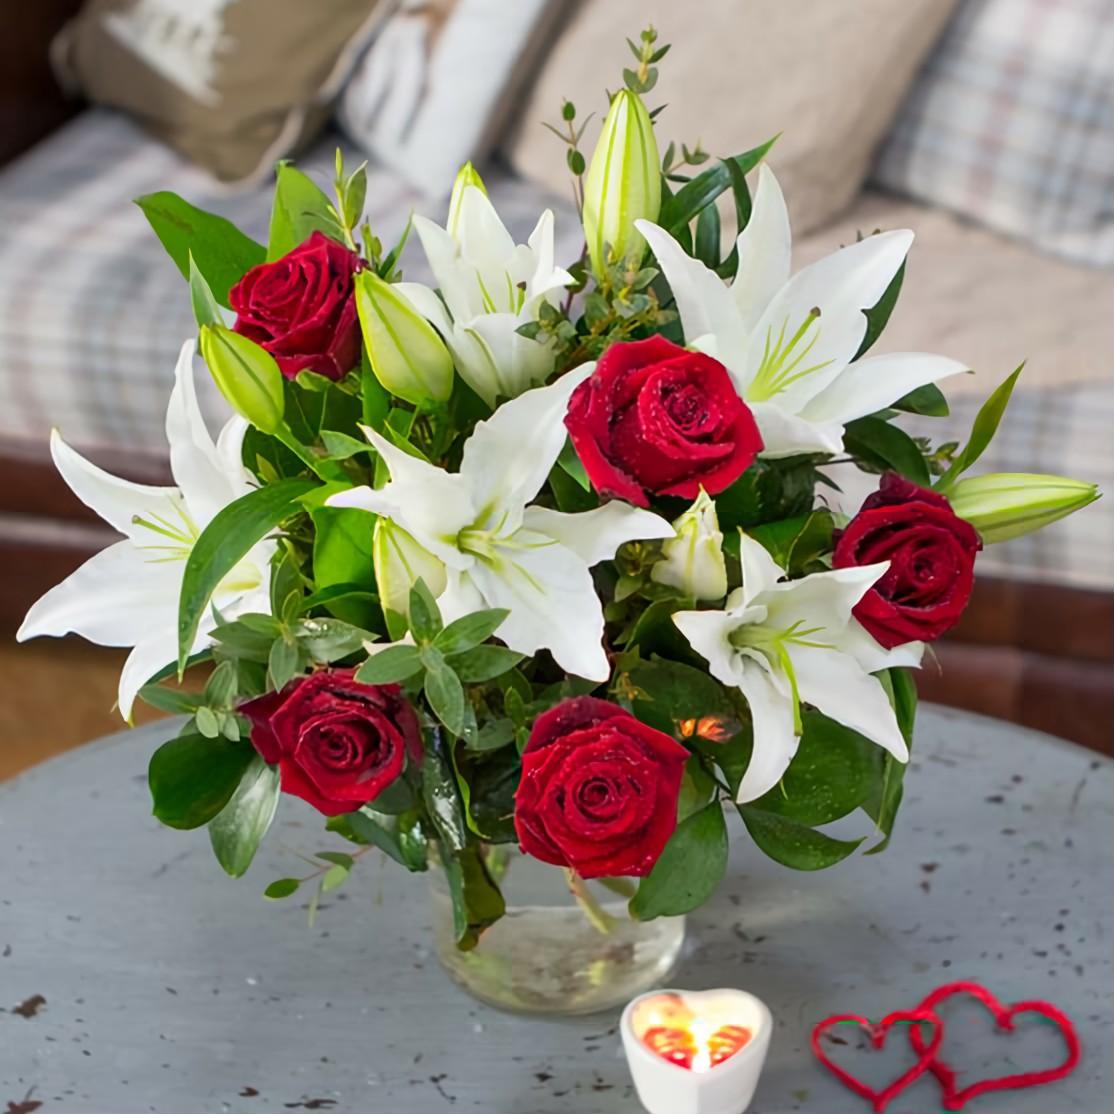 Unveil Deep Affection - Lily & Rose Bunch by Lily's Florist